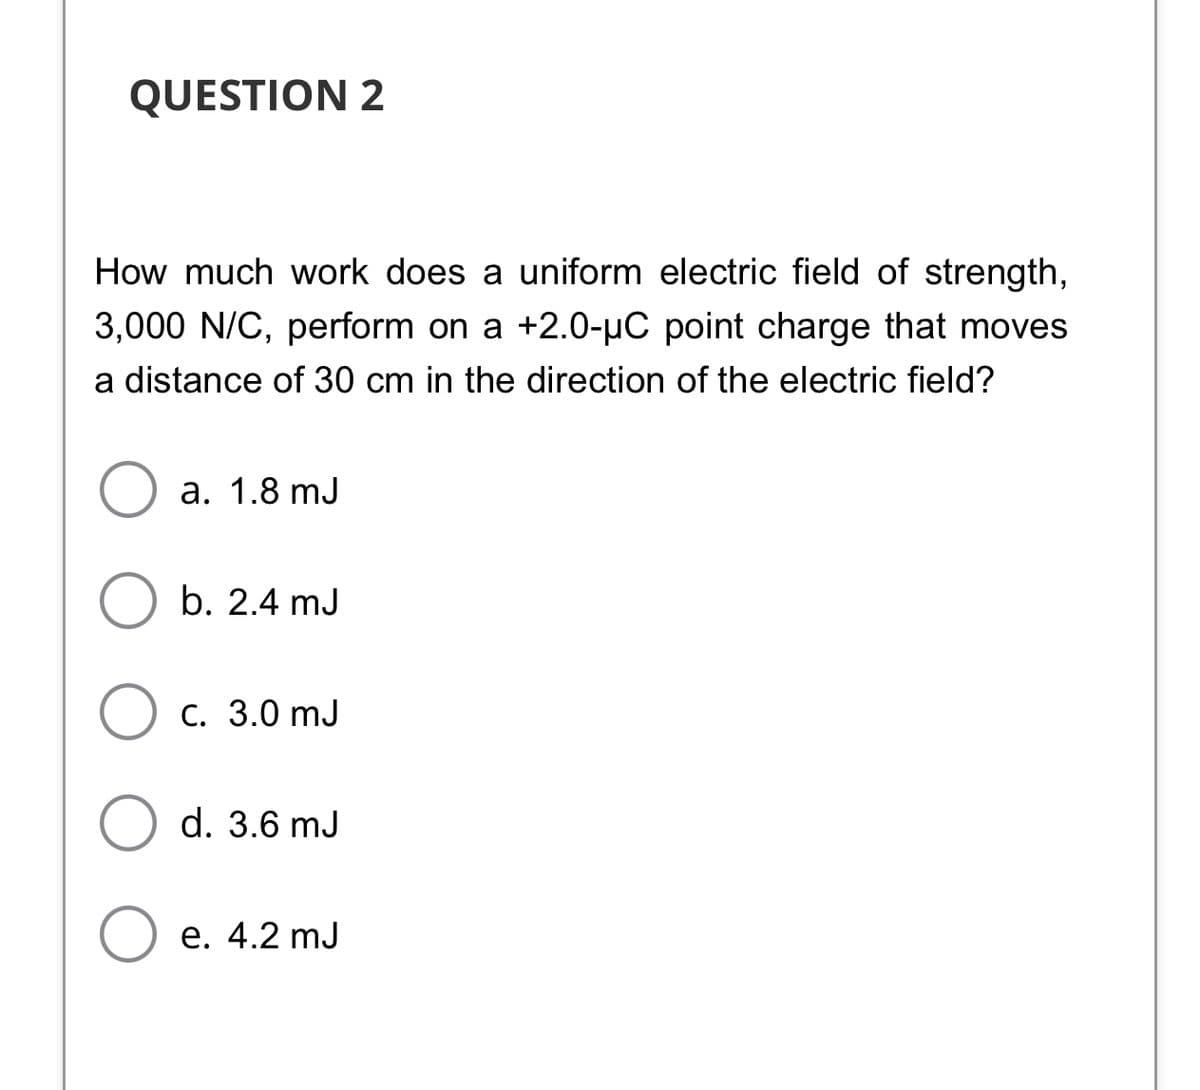 QUESTION 2
How much work does a uniform electric field of strength,
3,000 N/C, perform on a +2.0-uC point charge that moves
a distance of 30 cm in the direction of the electric field?
a. 1.8 mJ
b. 2.4 mJ
С. 3.0 mJ
d. 3.6 mJ
Ое. 4.2 mJ
